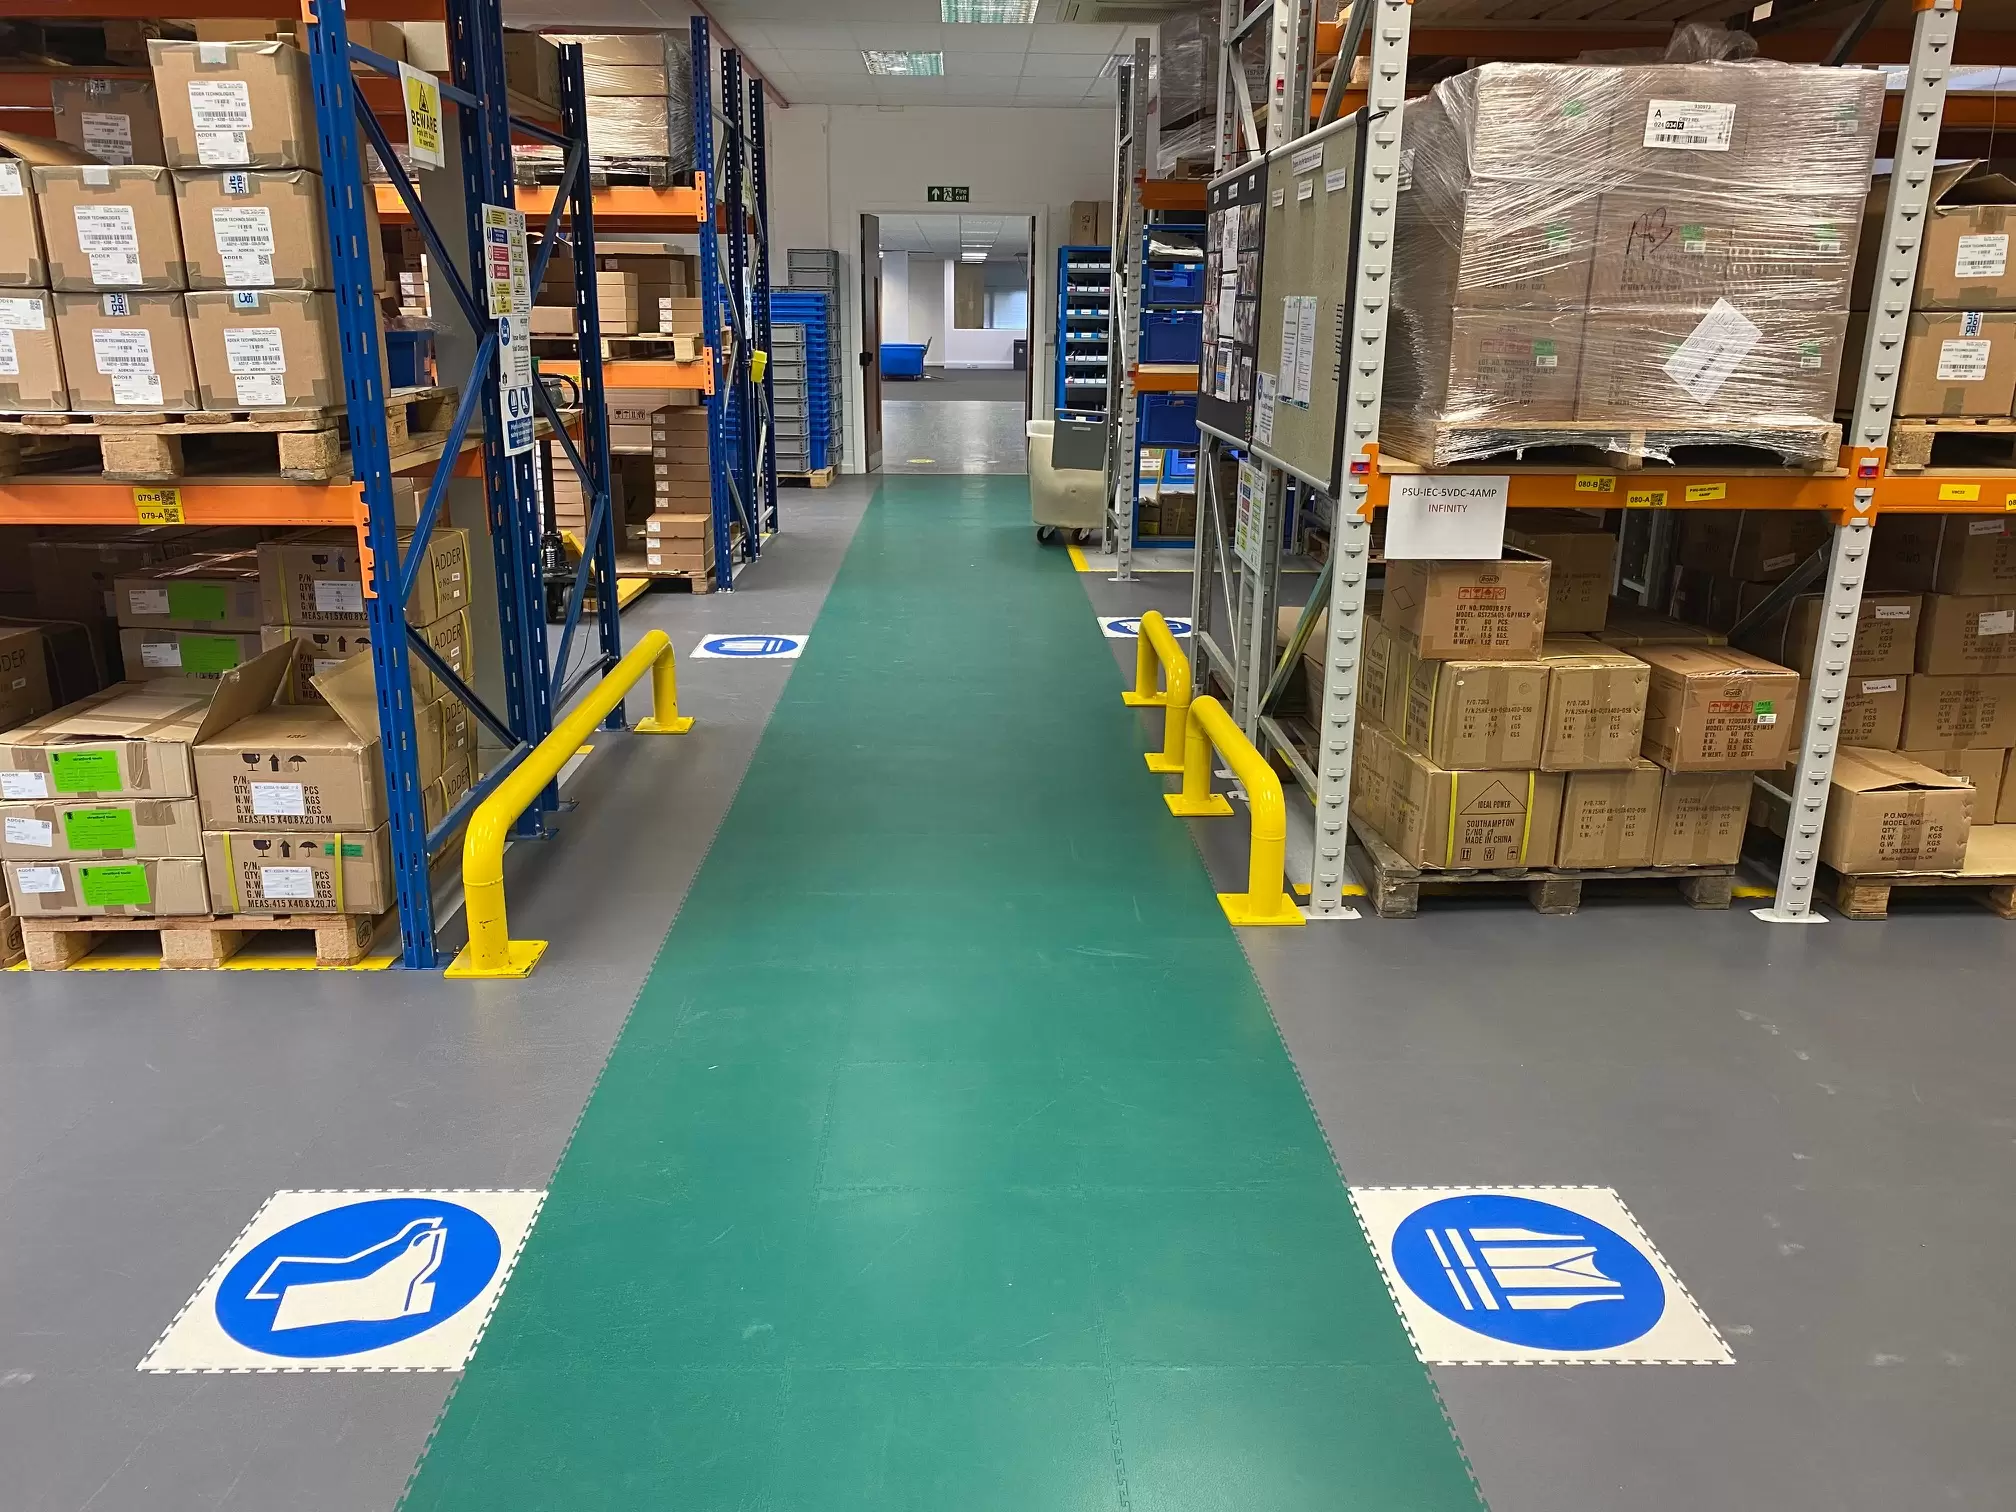 Combining green ecotiles and safety messages to create a safe walkway in a warehouse